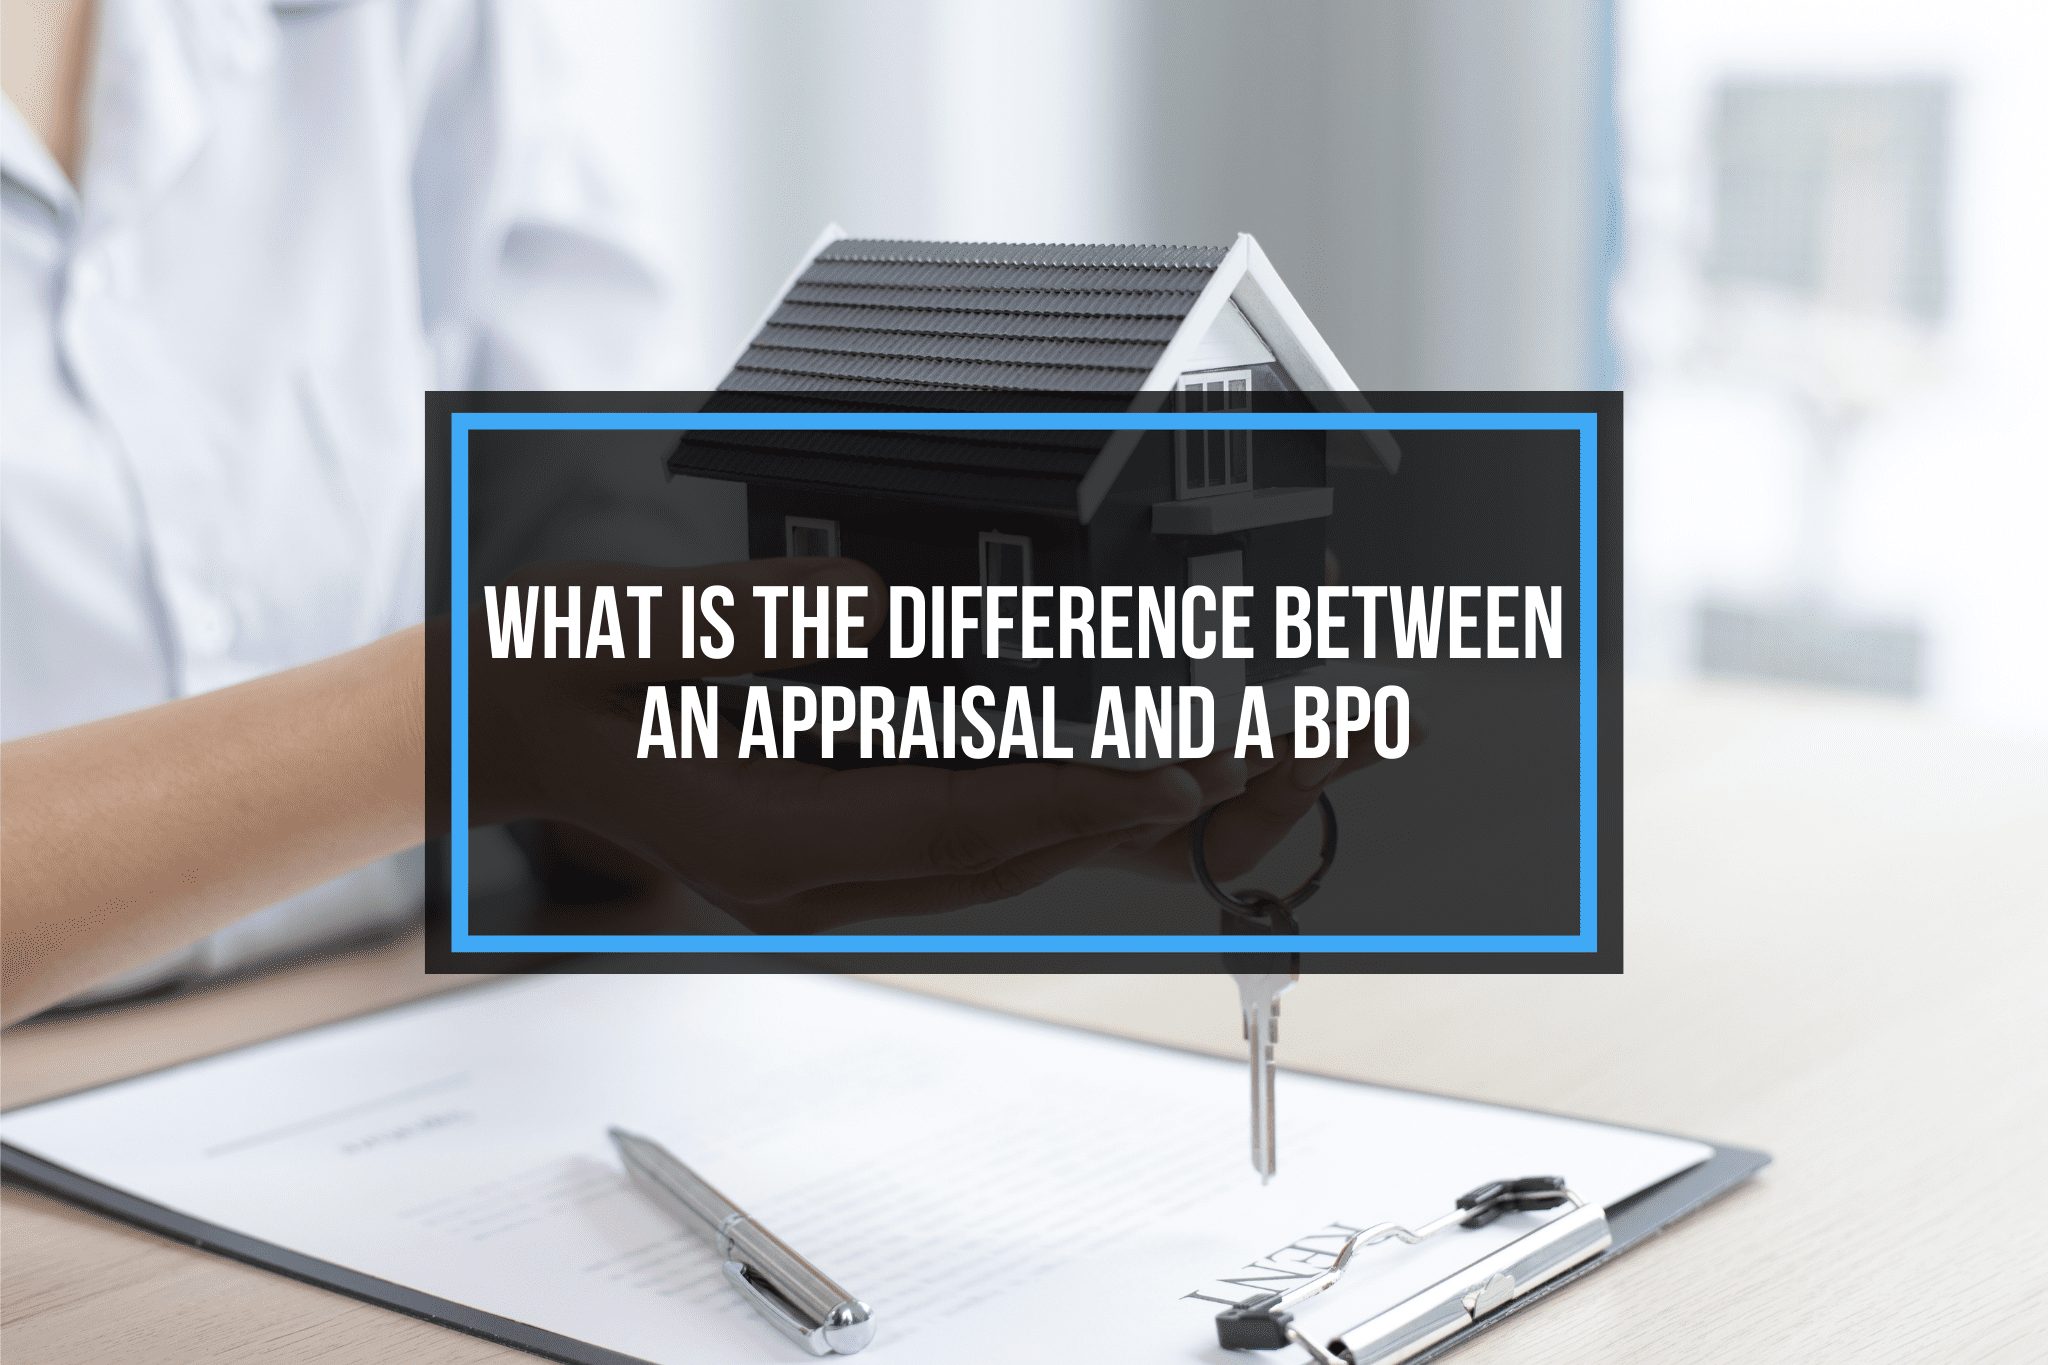 What Is The Difference Between An Appraisal And A BPO